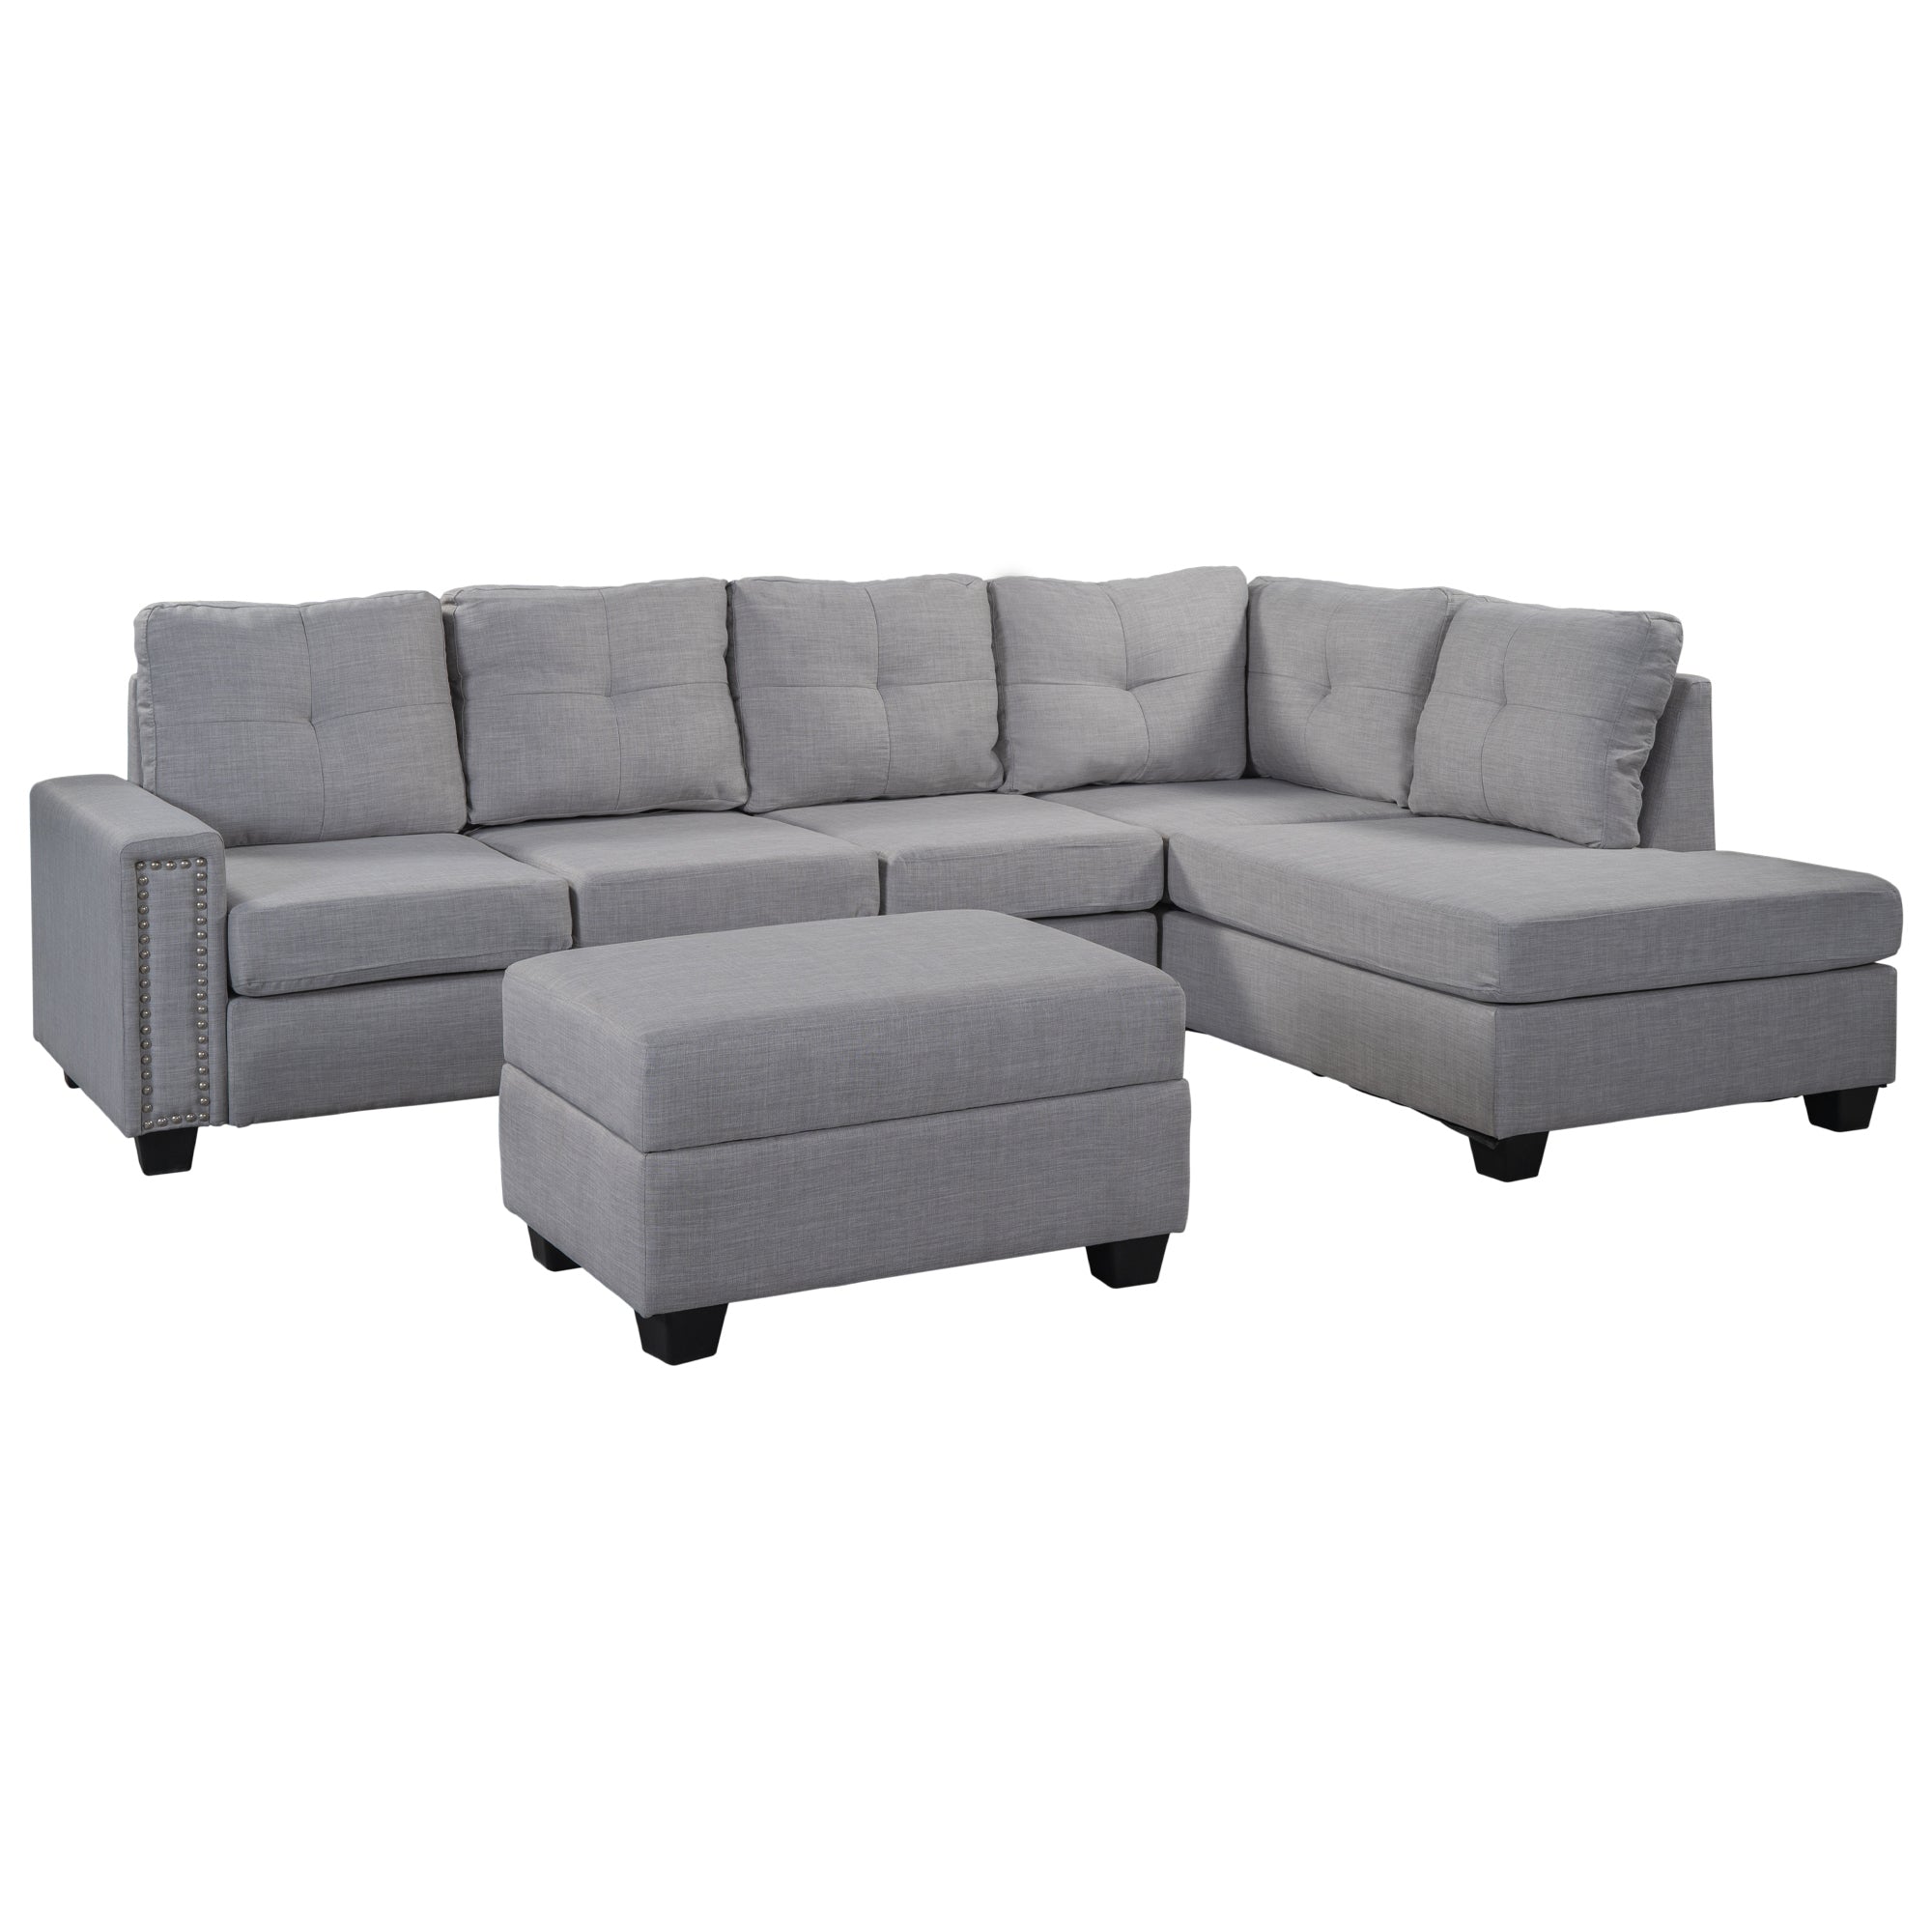 Orisfur Reversible Sectional Sofa with Space-Saving Design and Storage Ottoman | Rivet Ornament L-Shape Couch | Ideal for Large Spaces, Dorms, Apartments-Sofas-American Furniture Outlet